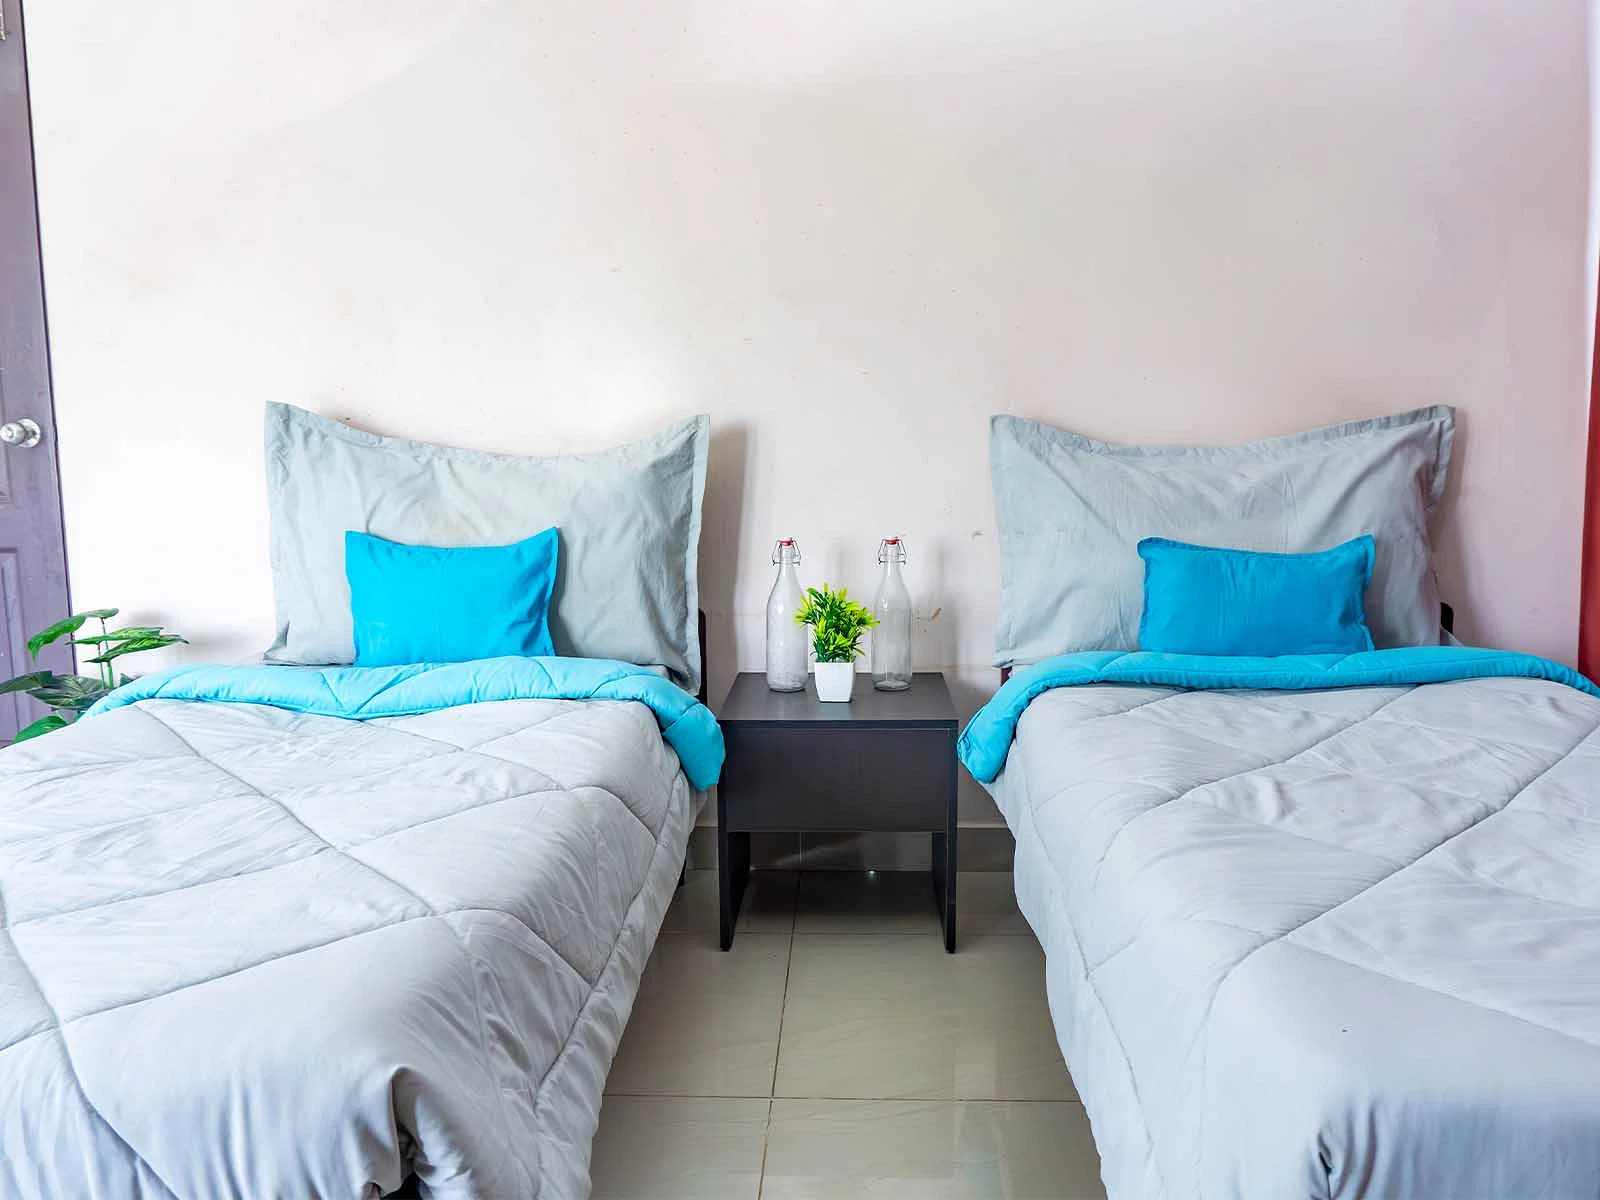 budget-friendly PGs and hostels for boys with single rooms with daily hopusekeeping-Zolo Thrones